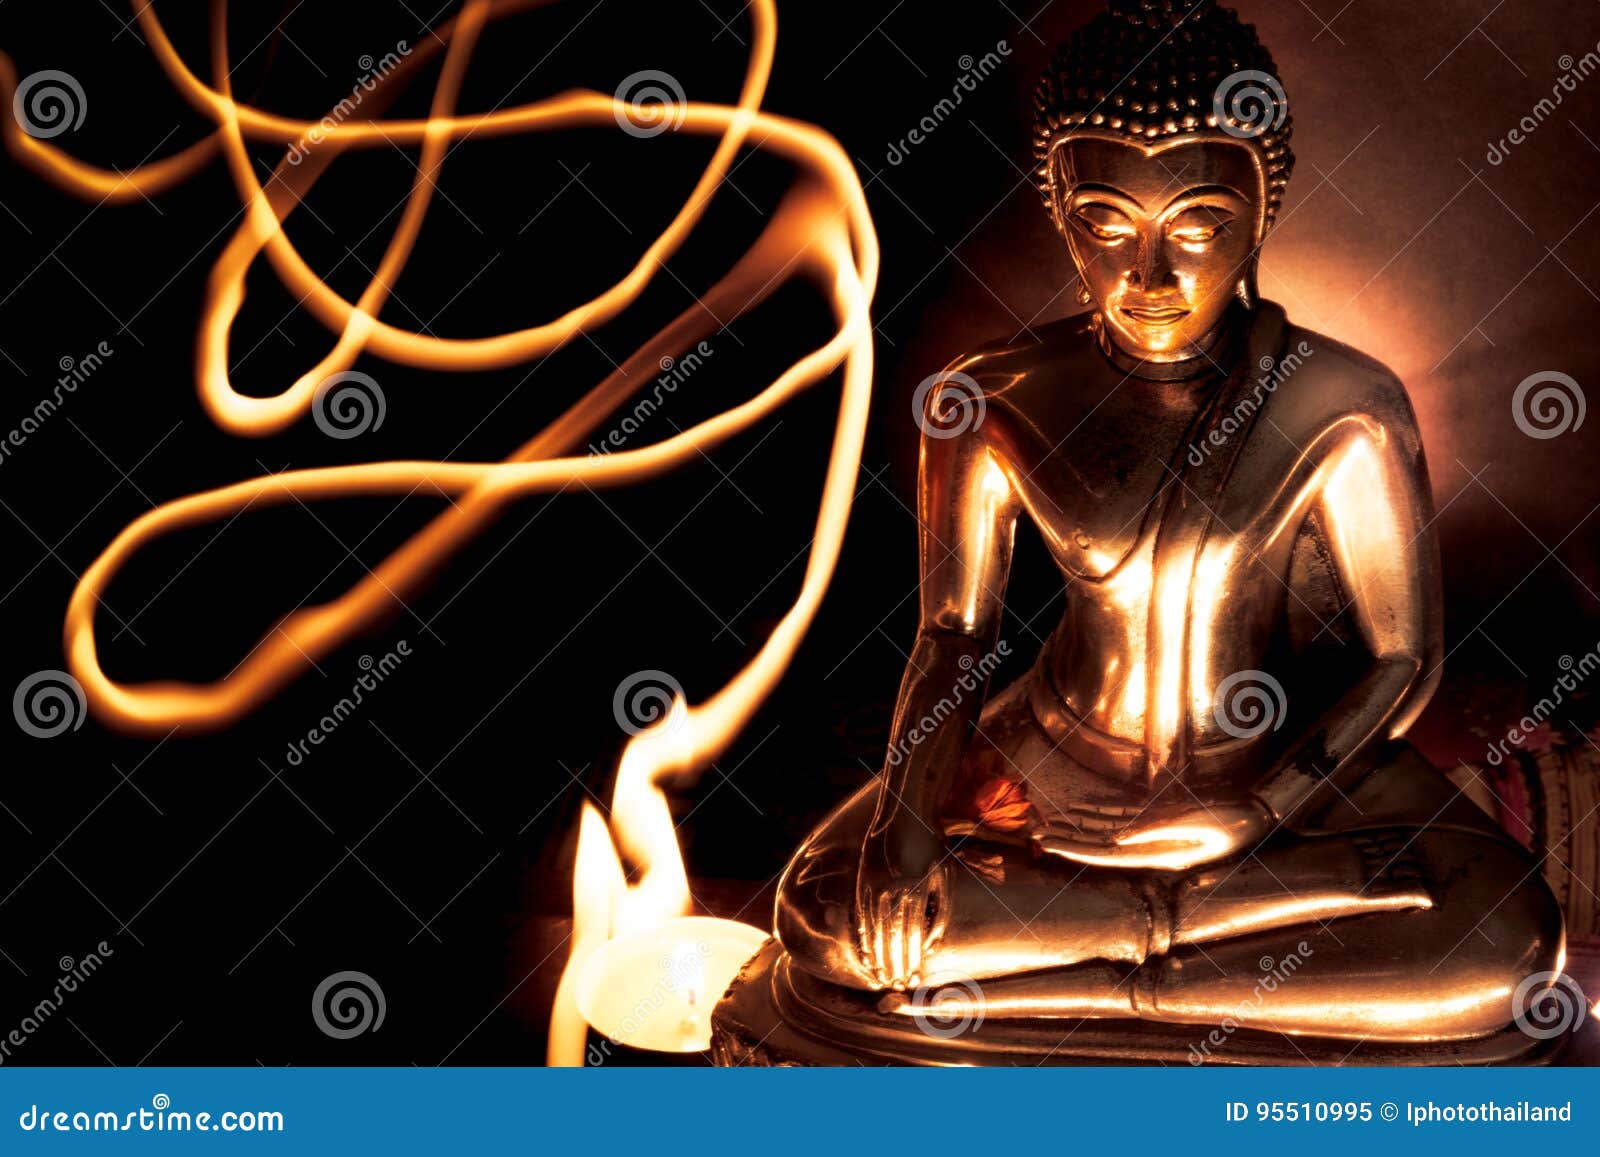 Selective Focus of Buddha Statue with Blurred Burning Candle Light ...